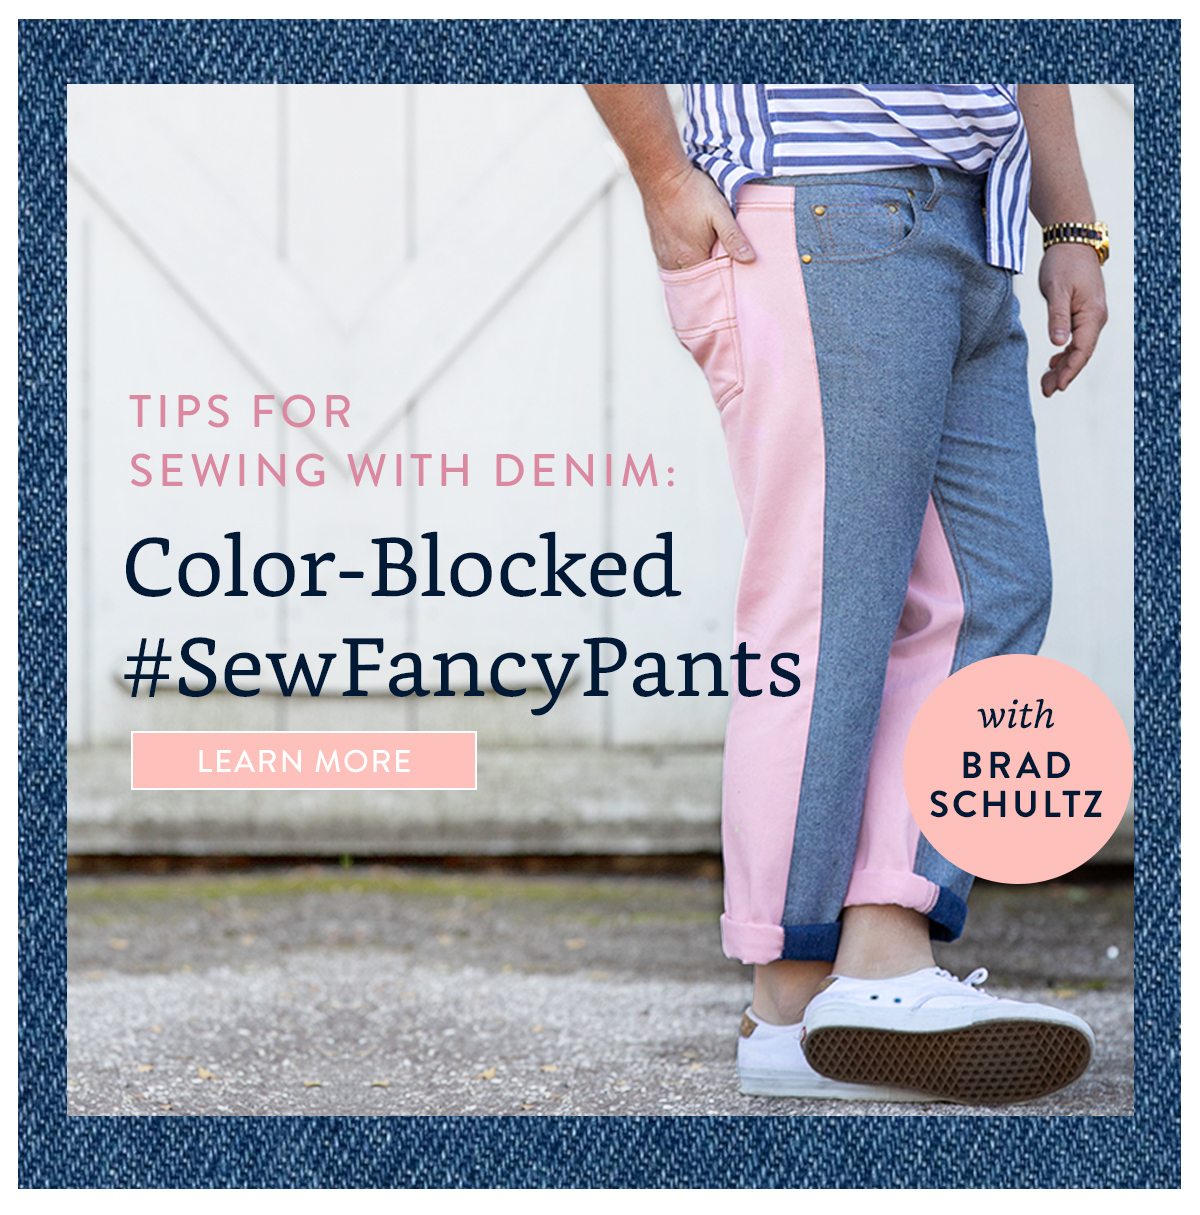 TIPS FOR SEWING WITH DENIM: Color-Blocked #SewFancyPants with BRAD SCHULTZ | LEARN MORE